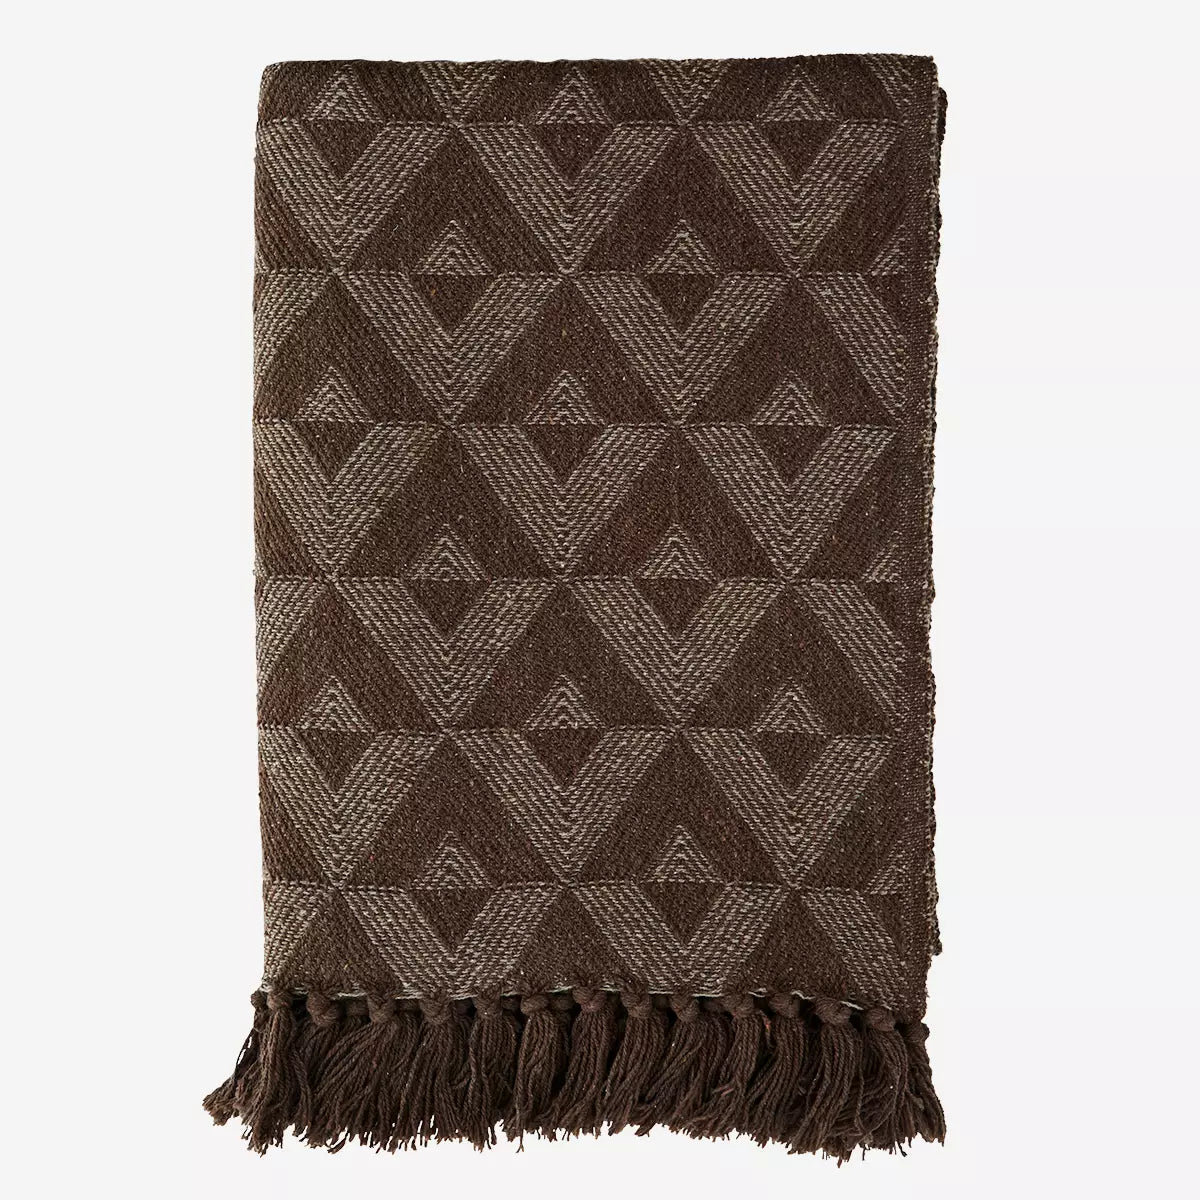 Sepia & Rich Cream Geometric Recycled Cotton Woven Throw